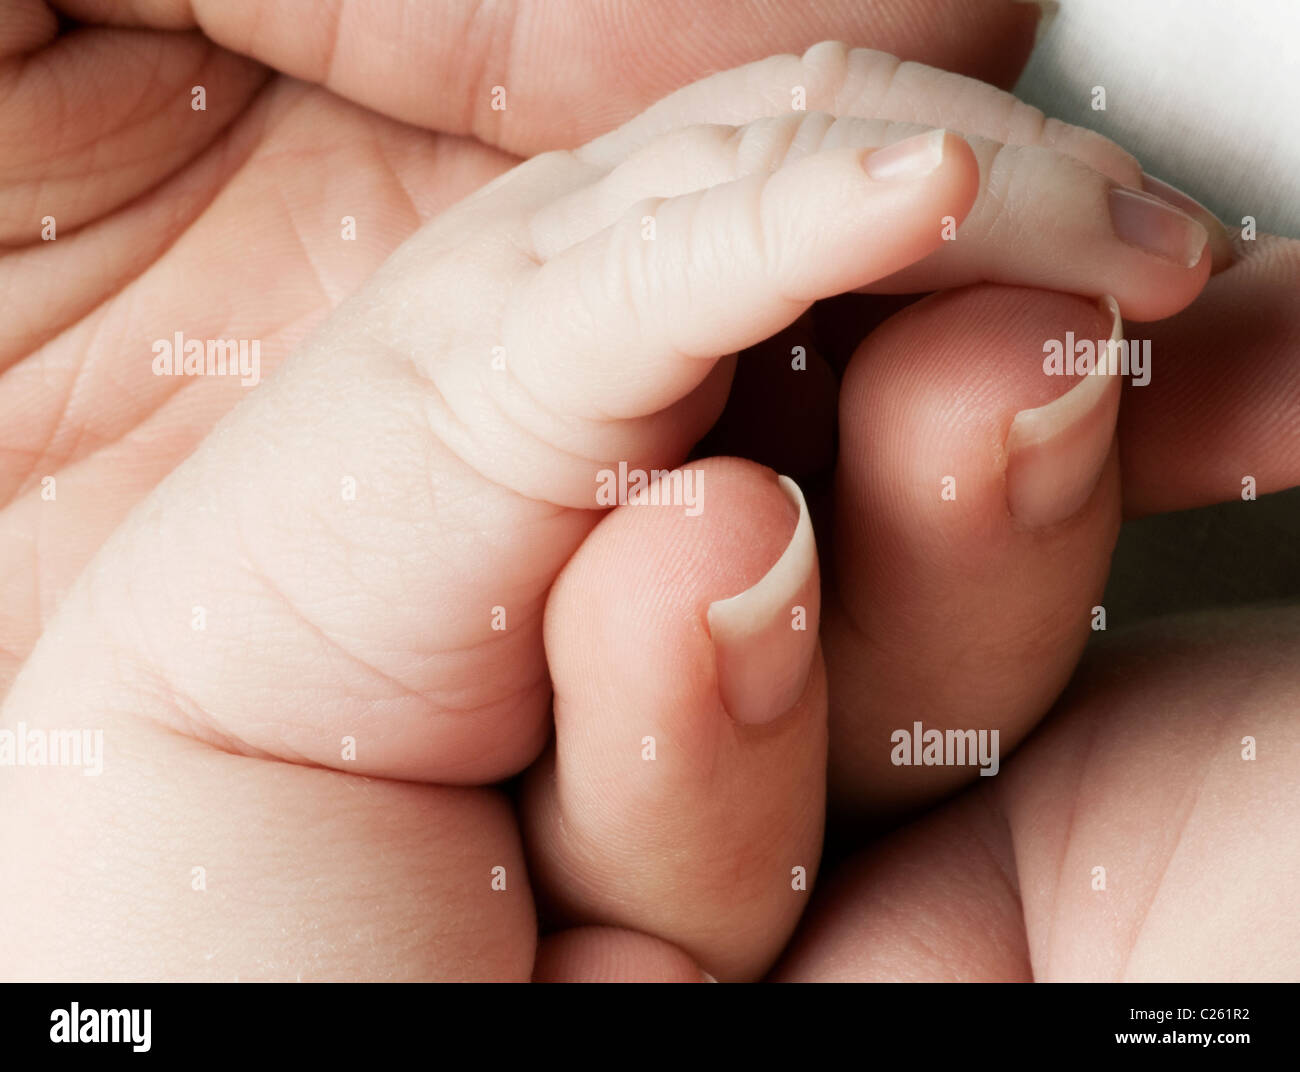 close-up of baby's hand being held in mother's hand Stock Photo